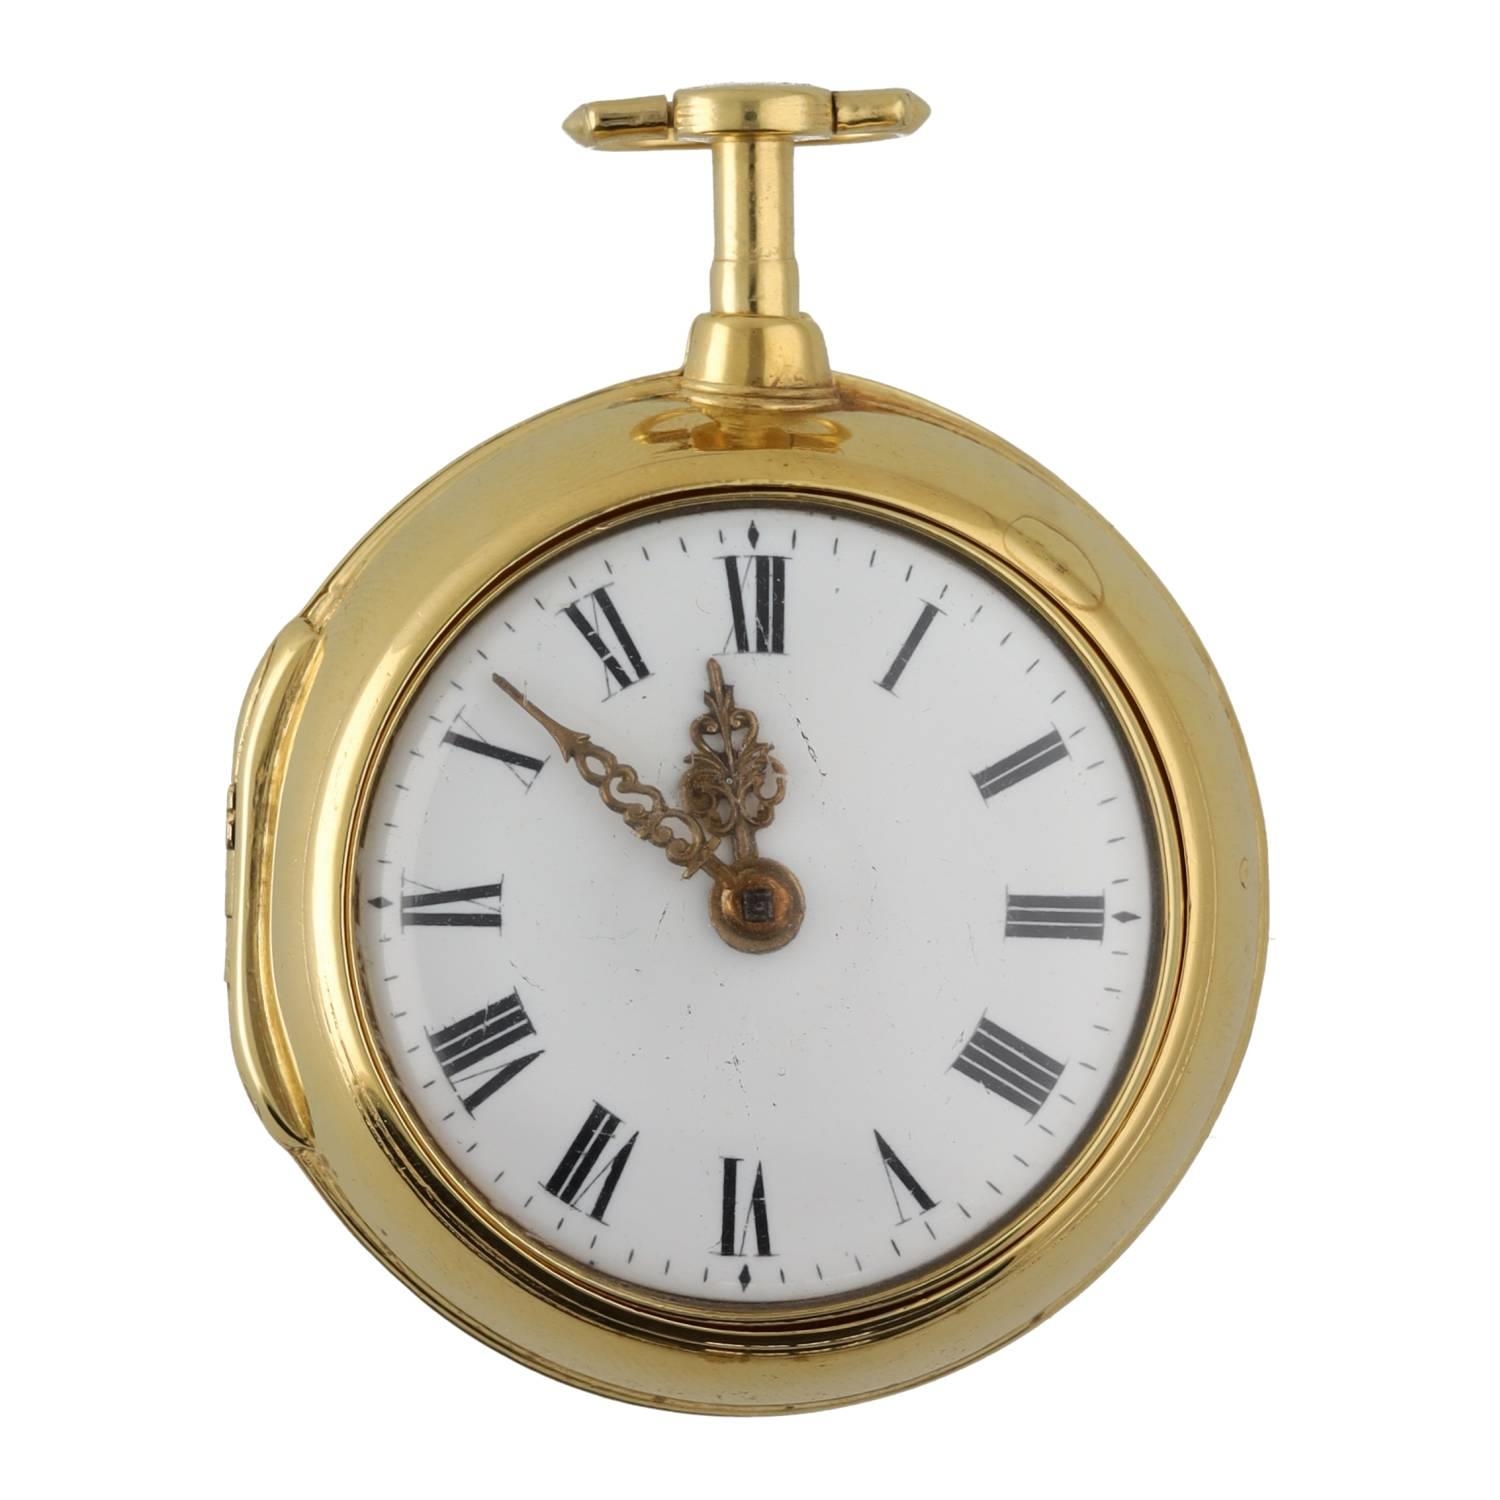 Finch & Bradley, Halifax - fine 18th century gilt pair cased verge pocket watch, the movement with - Image 2 of 6